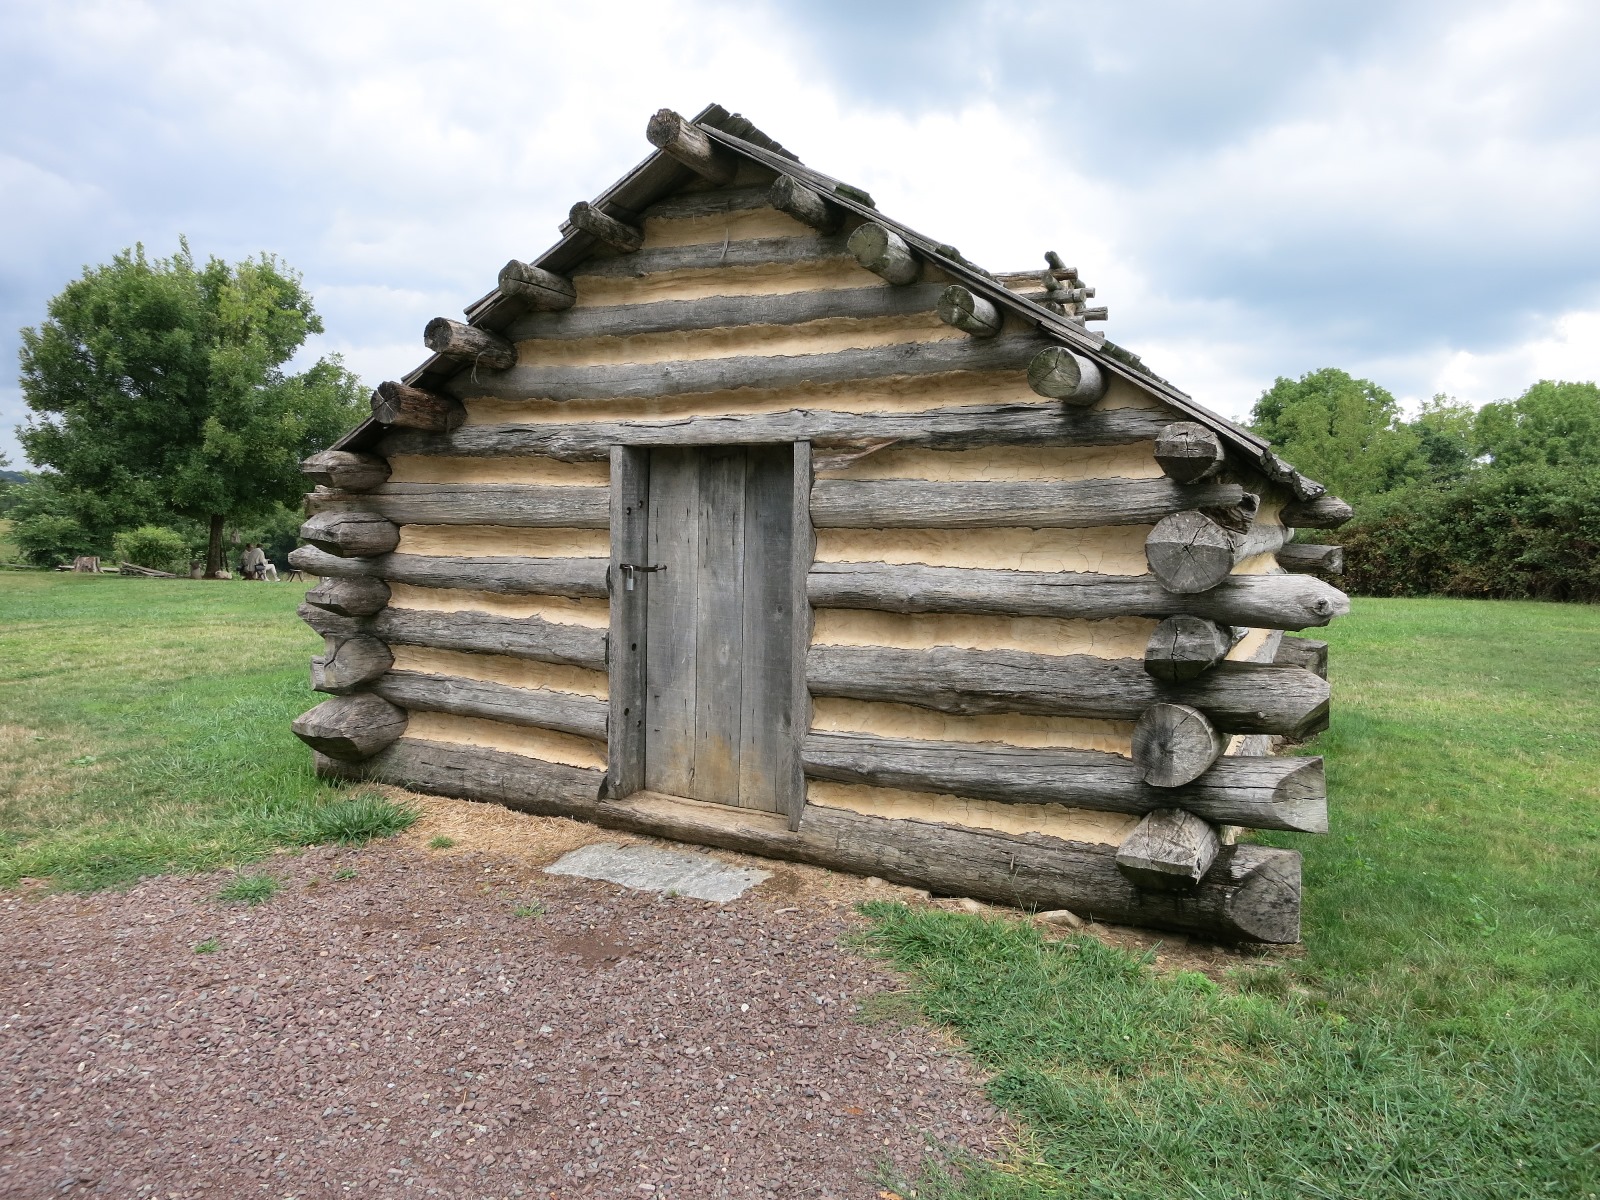 Replica hut at Valley Forge National Park, Pennsylvania. located along with several other huts on North Outer Line Drive. Photo taken on August 22, 2014.